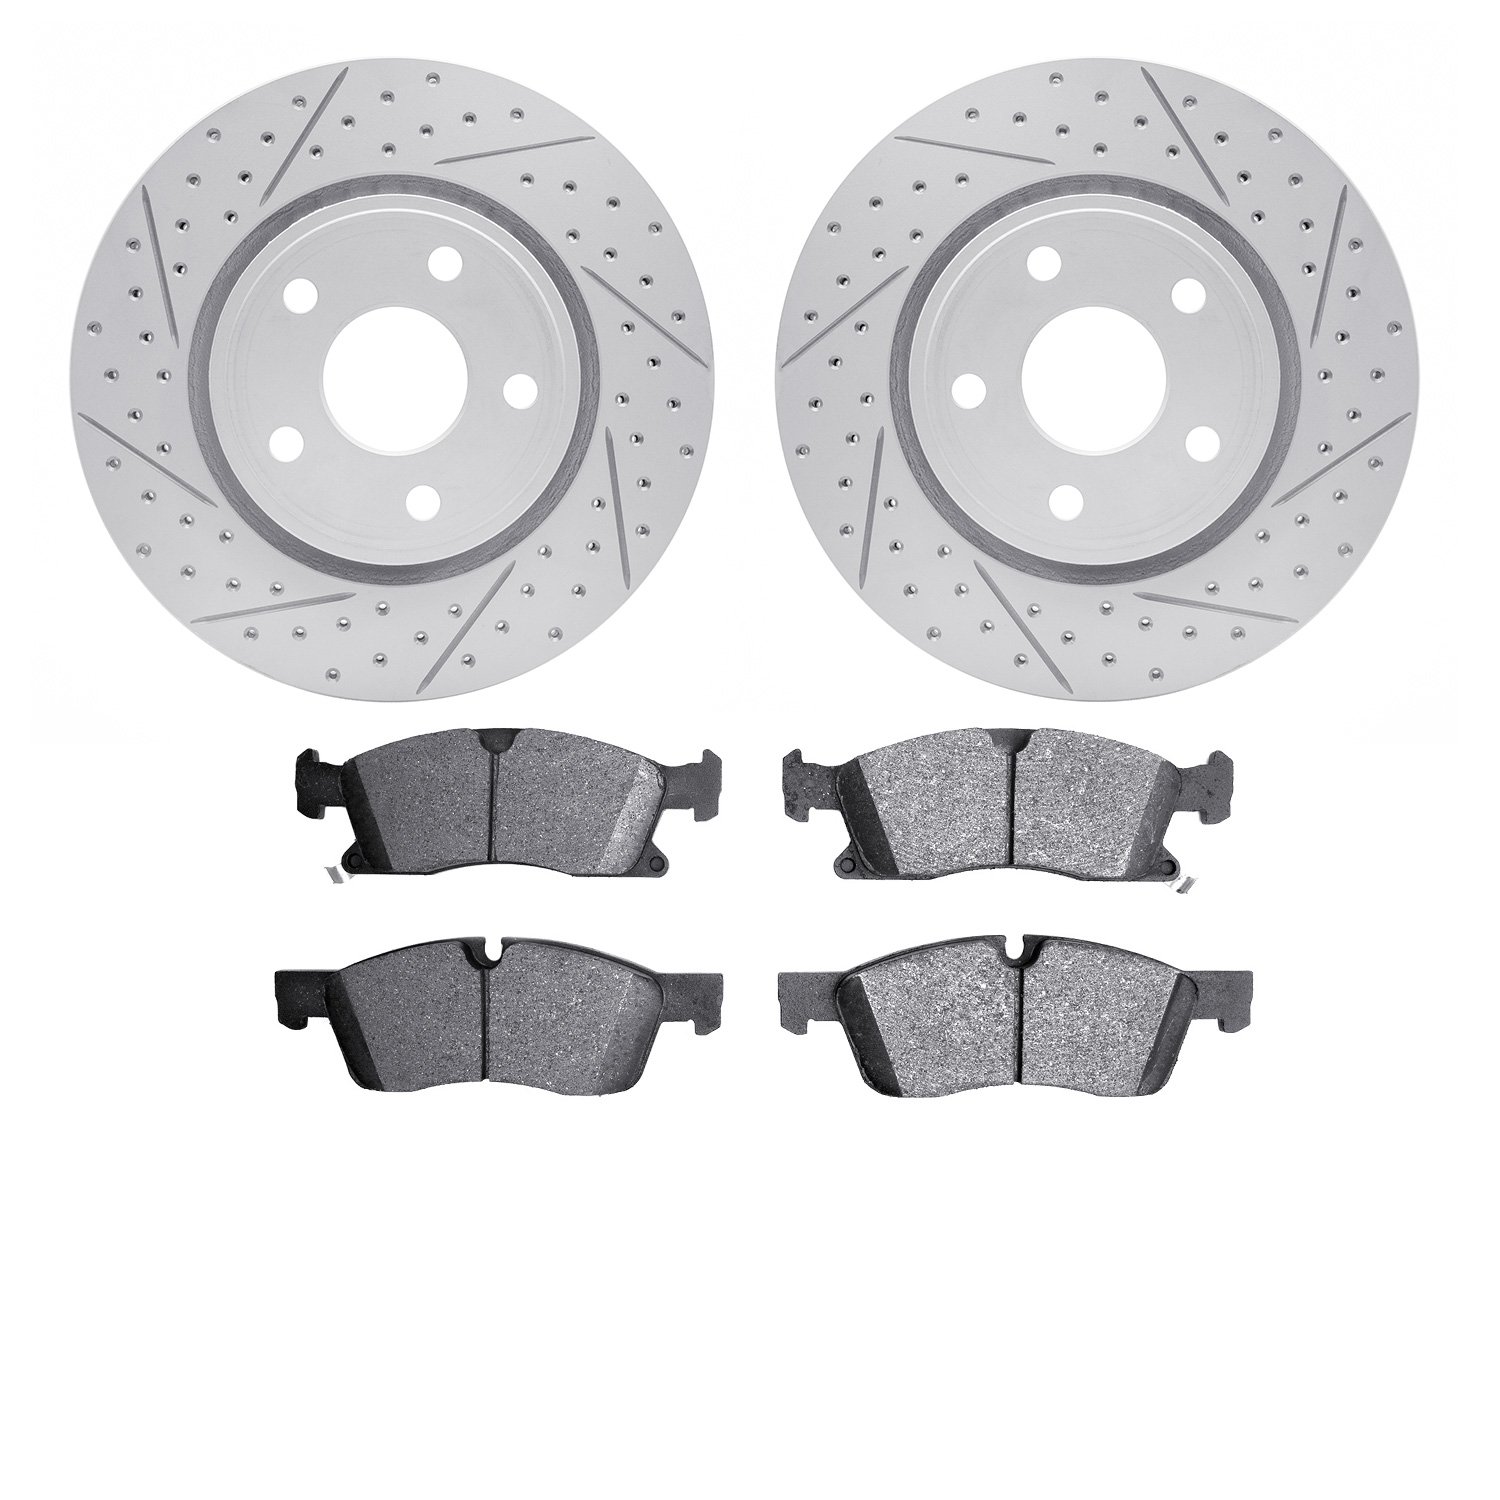 2502-42004 Geoperformance Drilled/Slotted Rotors w/5000 Advanced Brake Pads Kit, Fits Select Mopar, Position: Front